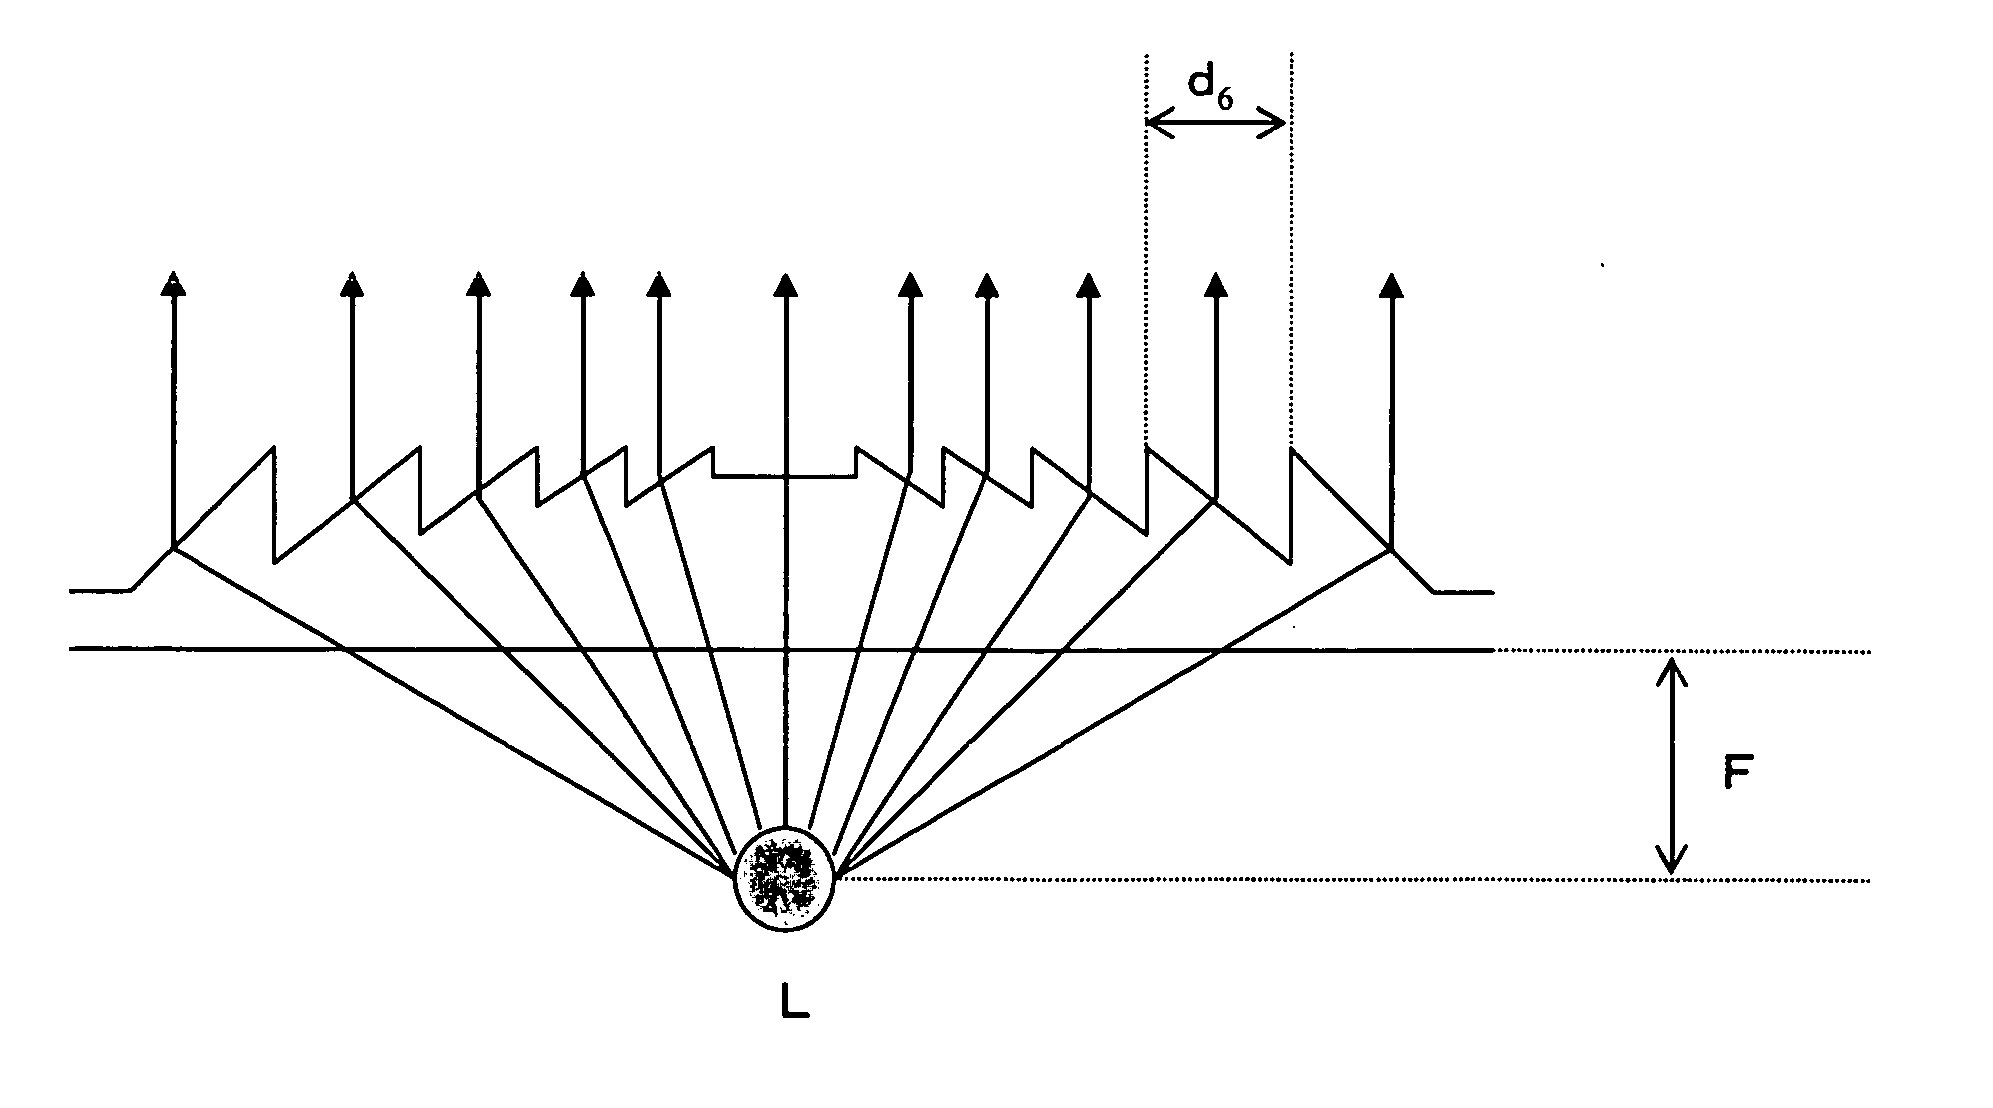 Prism-Integrated Light Diffusing Board And Method For Manufacturing The Same